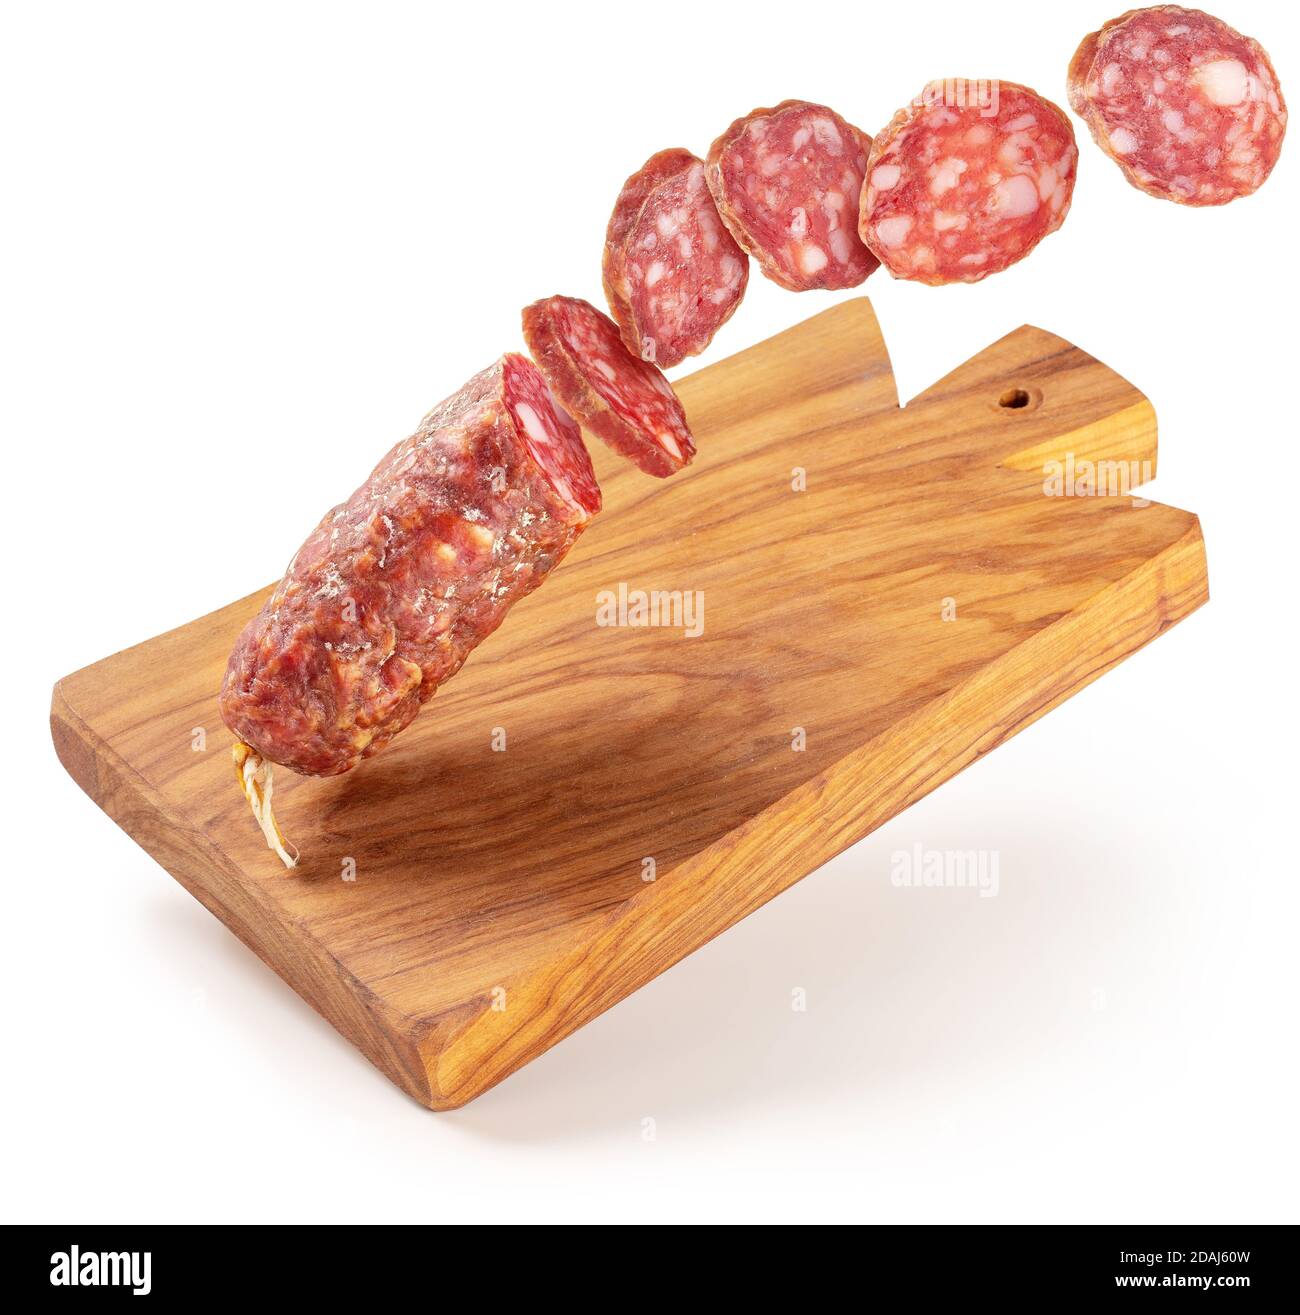 sliced salami flying on a wooden cutting board isolated Stock Photo